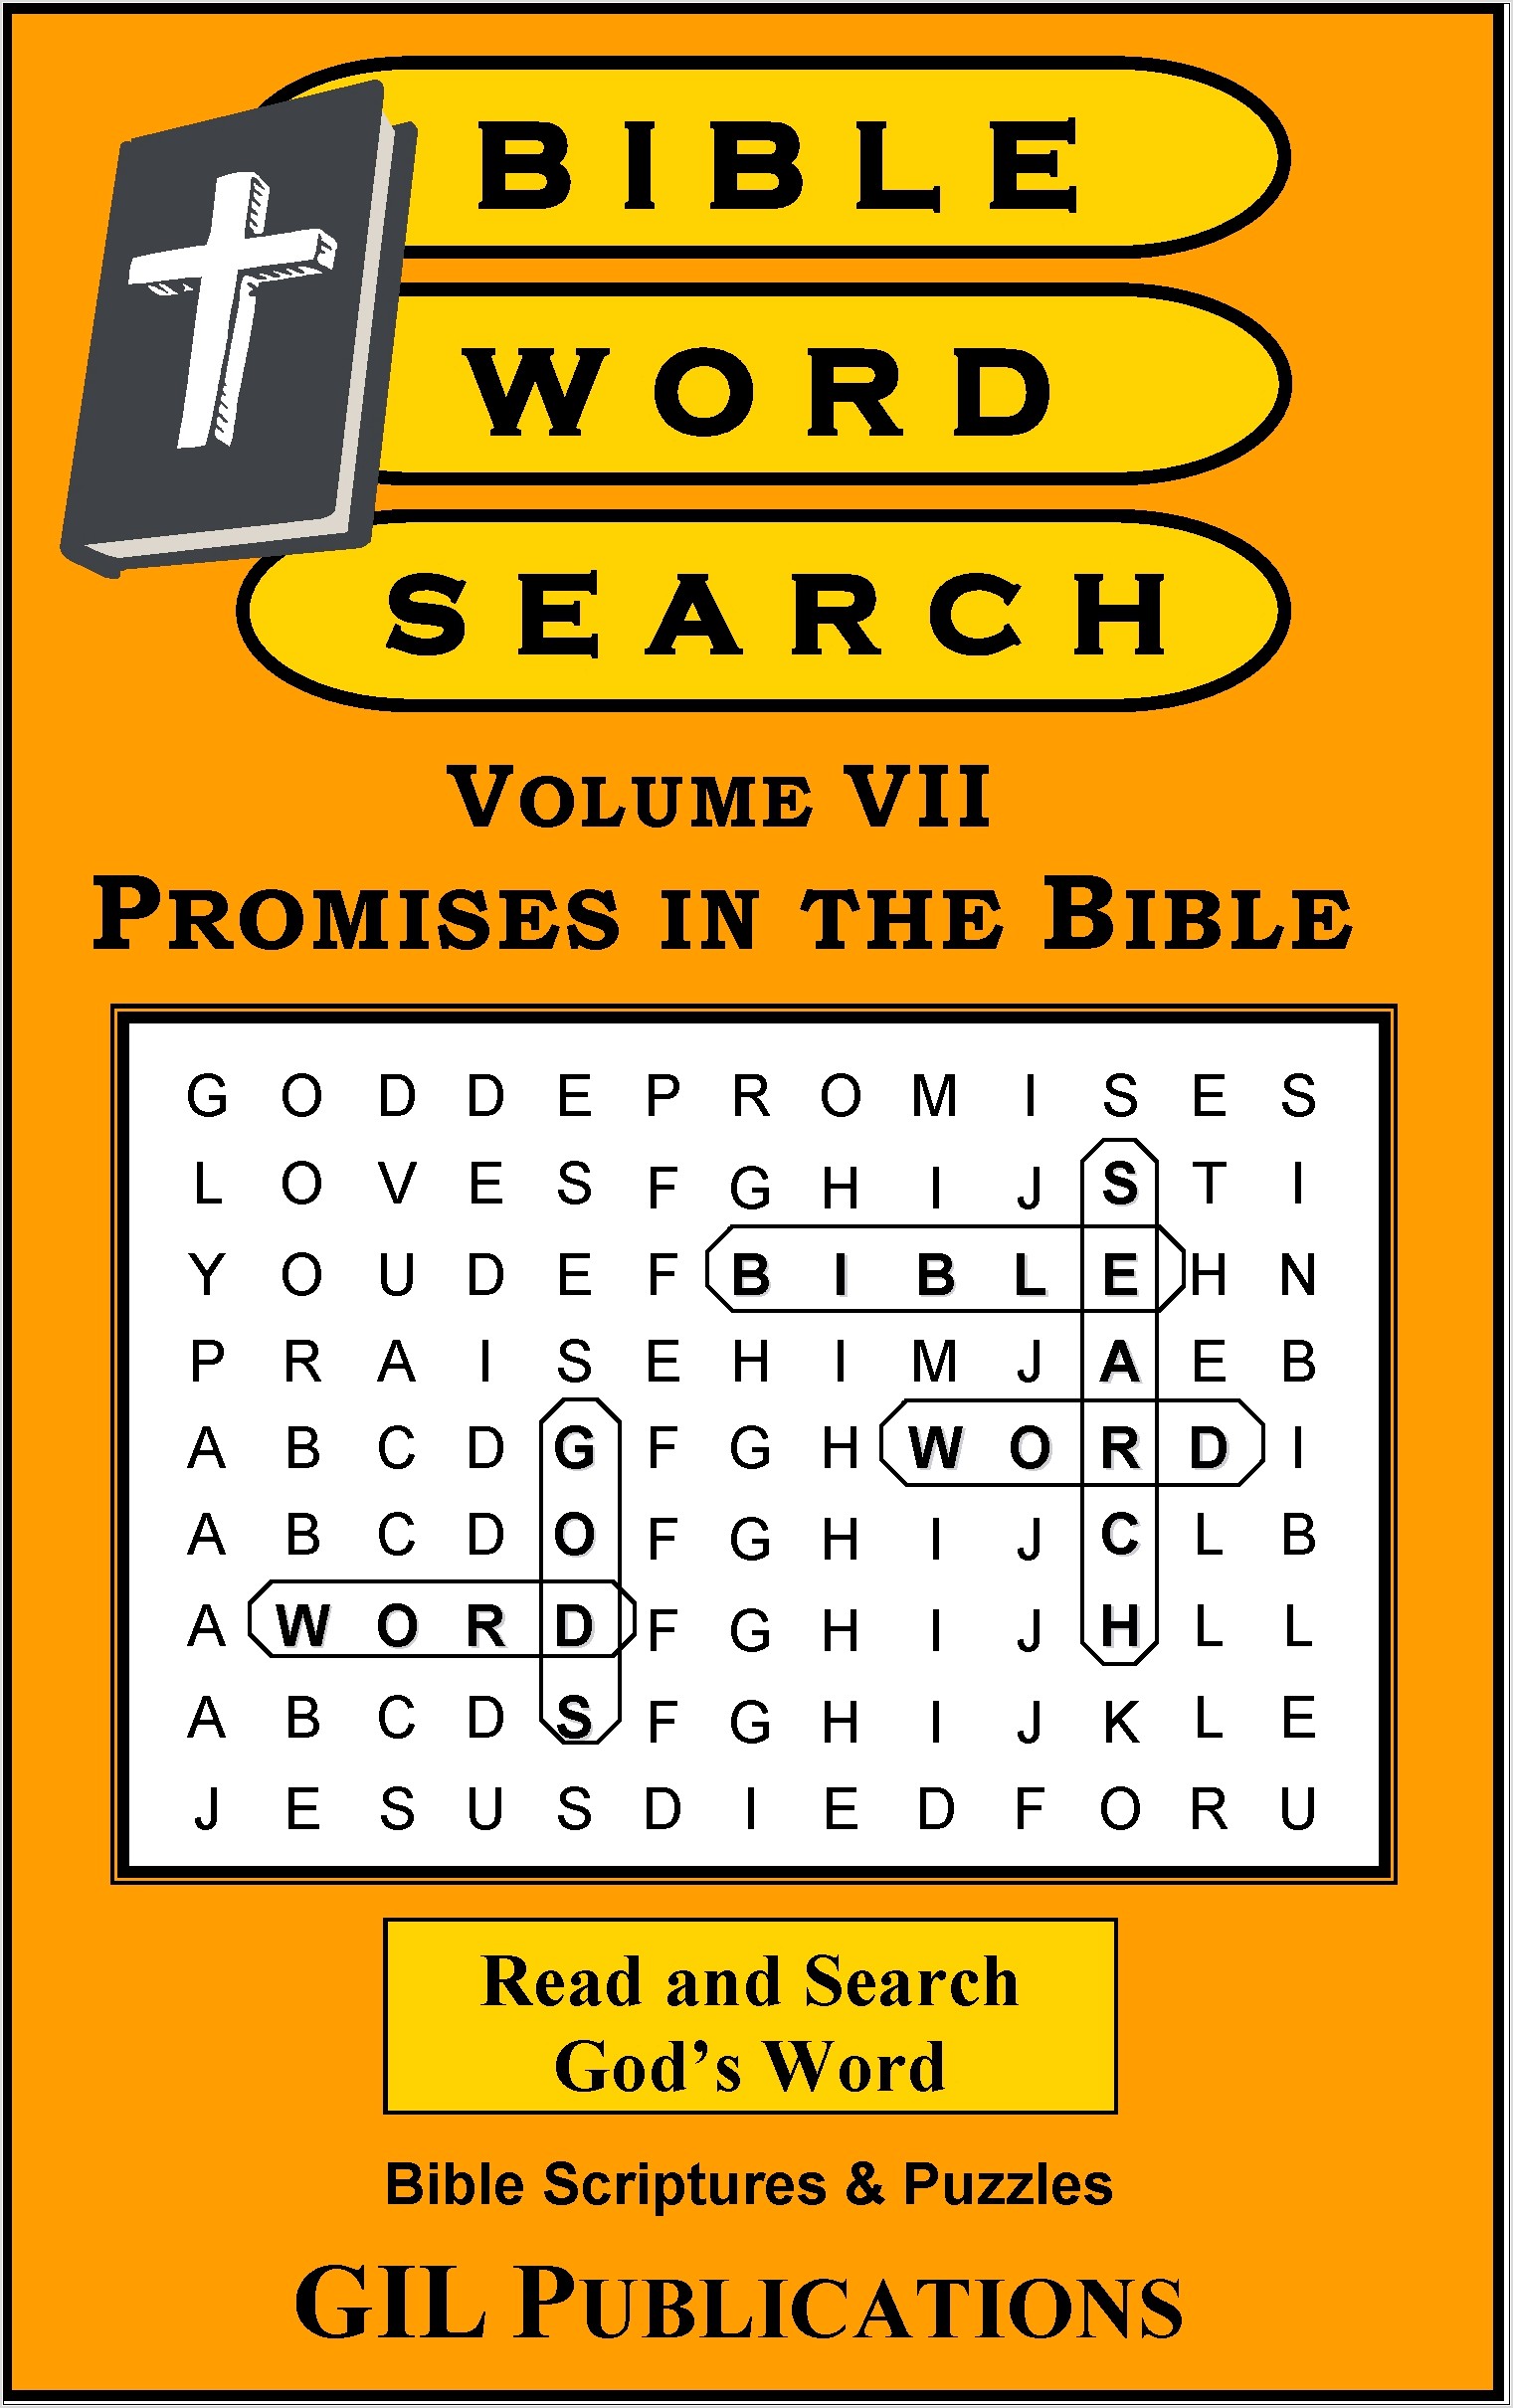 printable-word-search-puzzles-bible-worksheet-restiumani-resume-x1yv316vyq